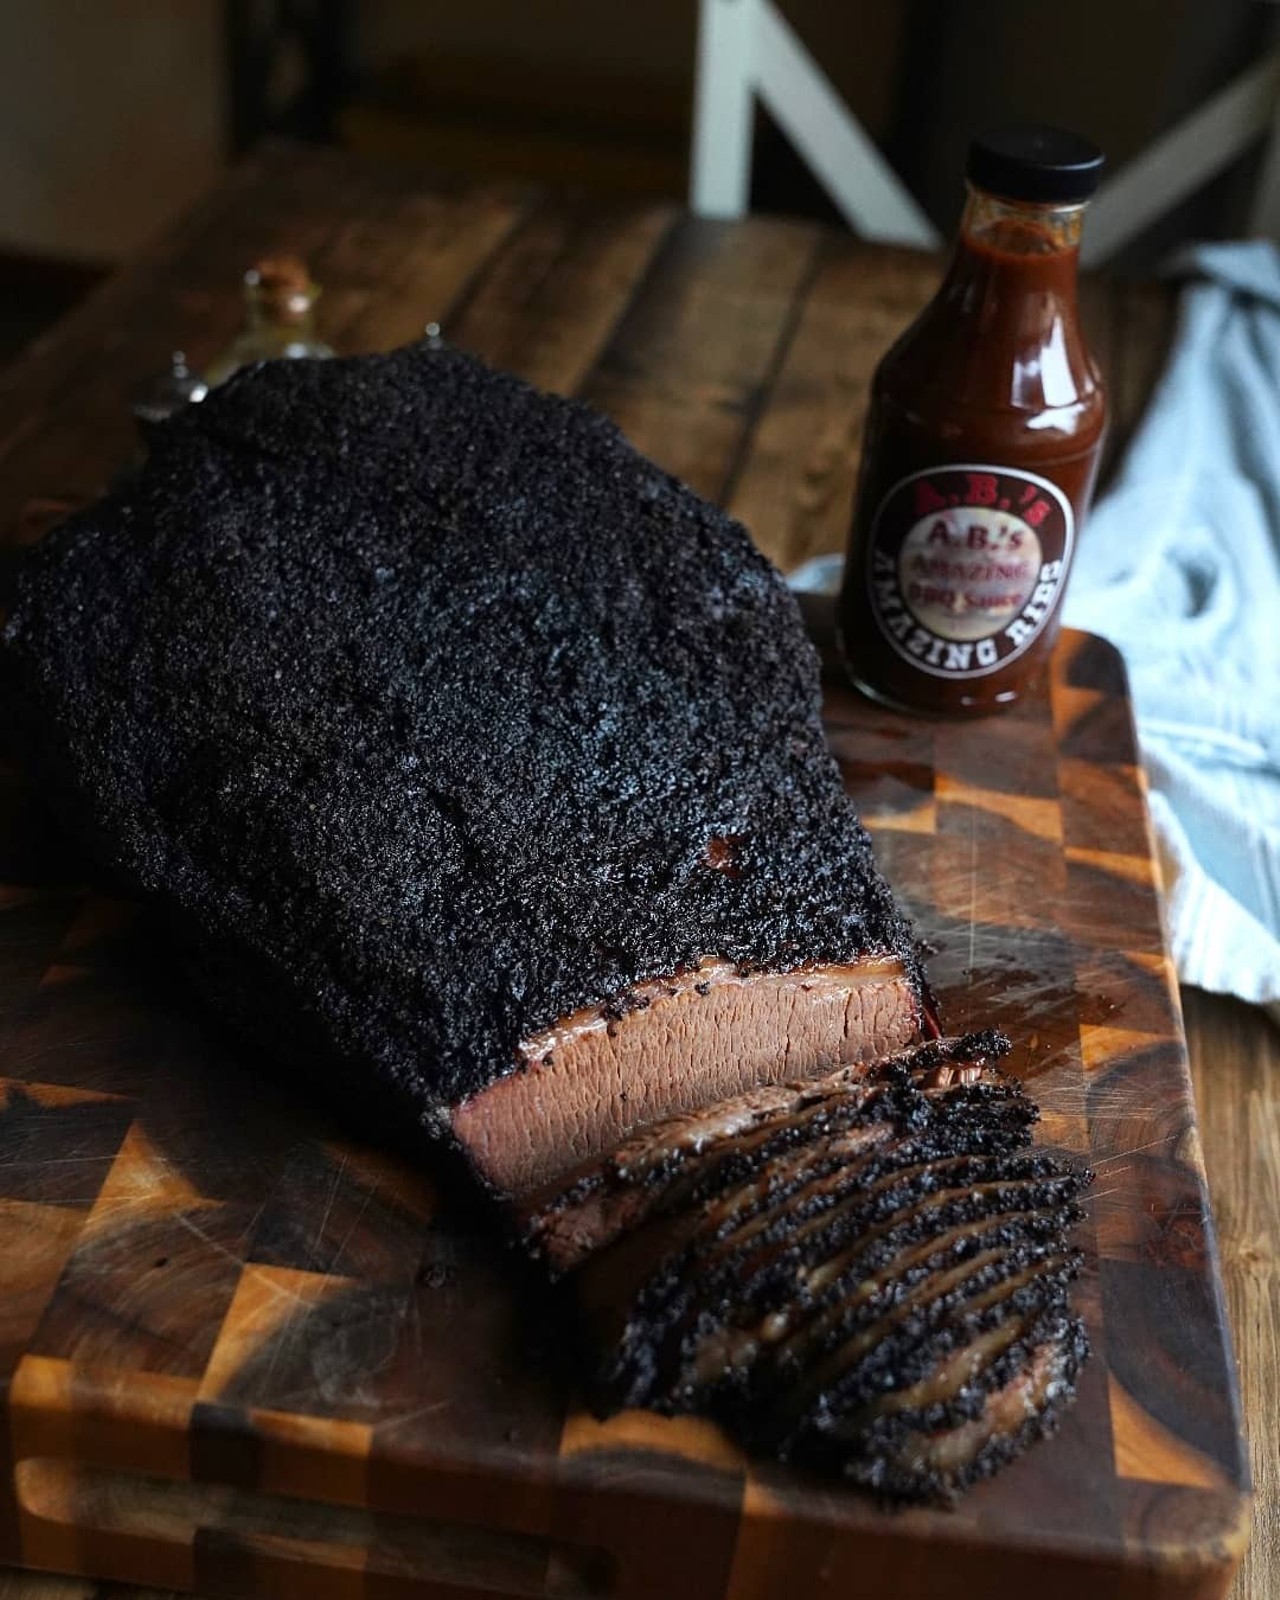 Eat some essential metro Detroit barbecue
You know you haven&#146;t gotten laid during quarantine if the words &#147;dry-rubbed and smoked low and slow&#148; get you all hot and bothered. Well, keep your clothes on and grab a moist towelette (sorry), because metro Detroit is filled with essential barbecue joints, all of them doing god's work: filling our stomachs with brisket, pulled pork, and, yes, burnt ends. Vegans, you'll have to sit this one out. P.S. Our safe word is &#147;rib tips.&#148; Oh, shit, we almost forgot. Here's a list of essential BBQ spots in case you want to eat your way through them all.
Photo via A.B.&#146;s Amazing Ribs/Facebook